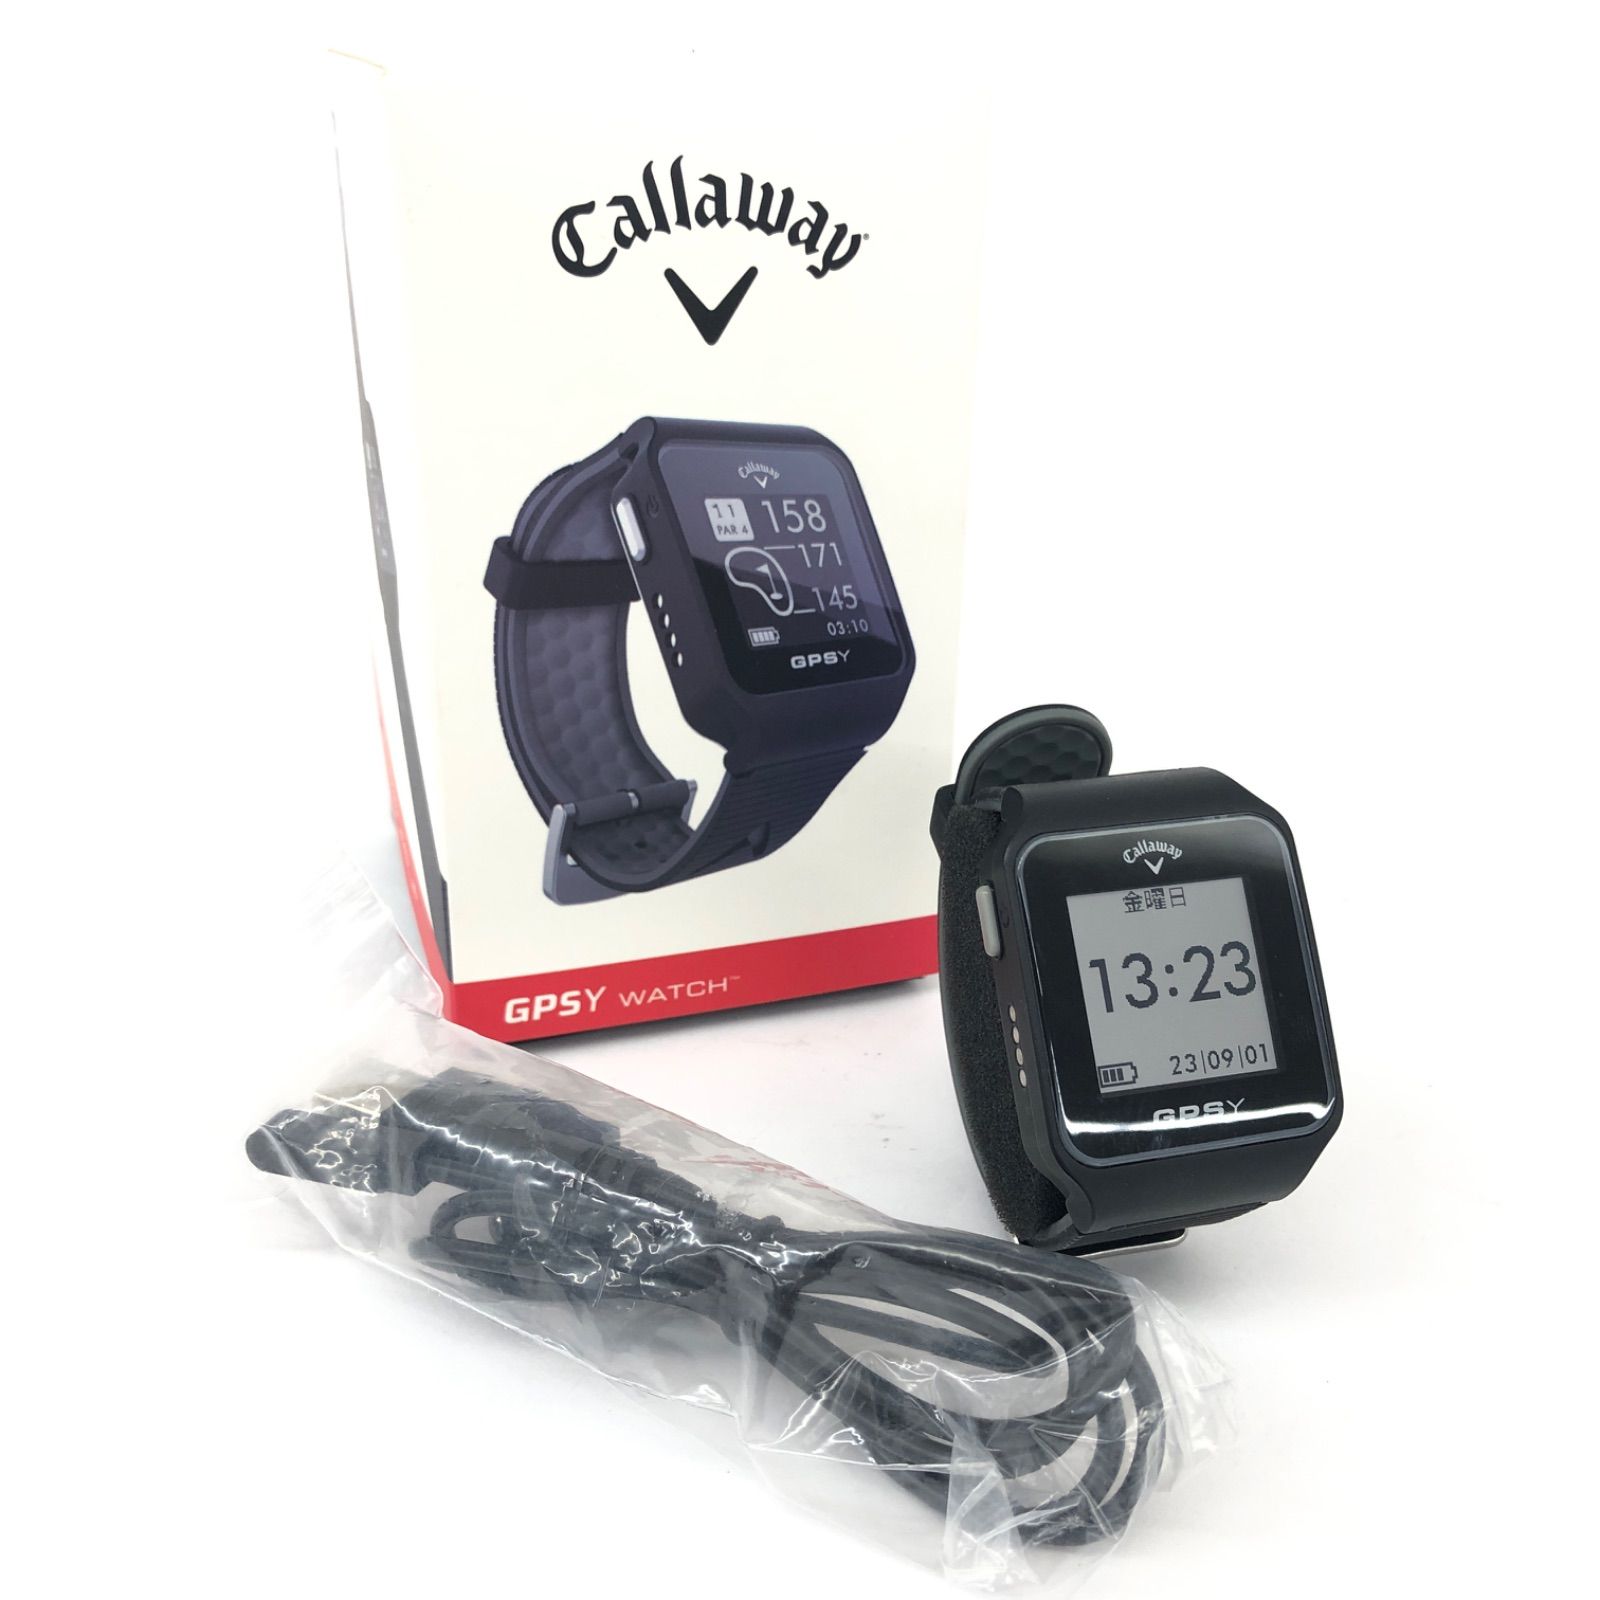 problems updating callaway gpsy watch